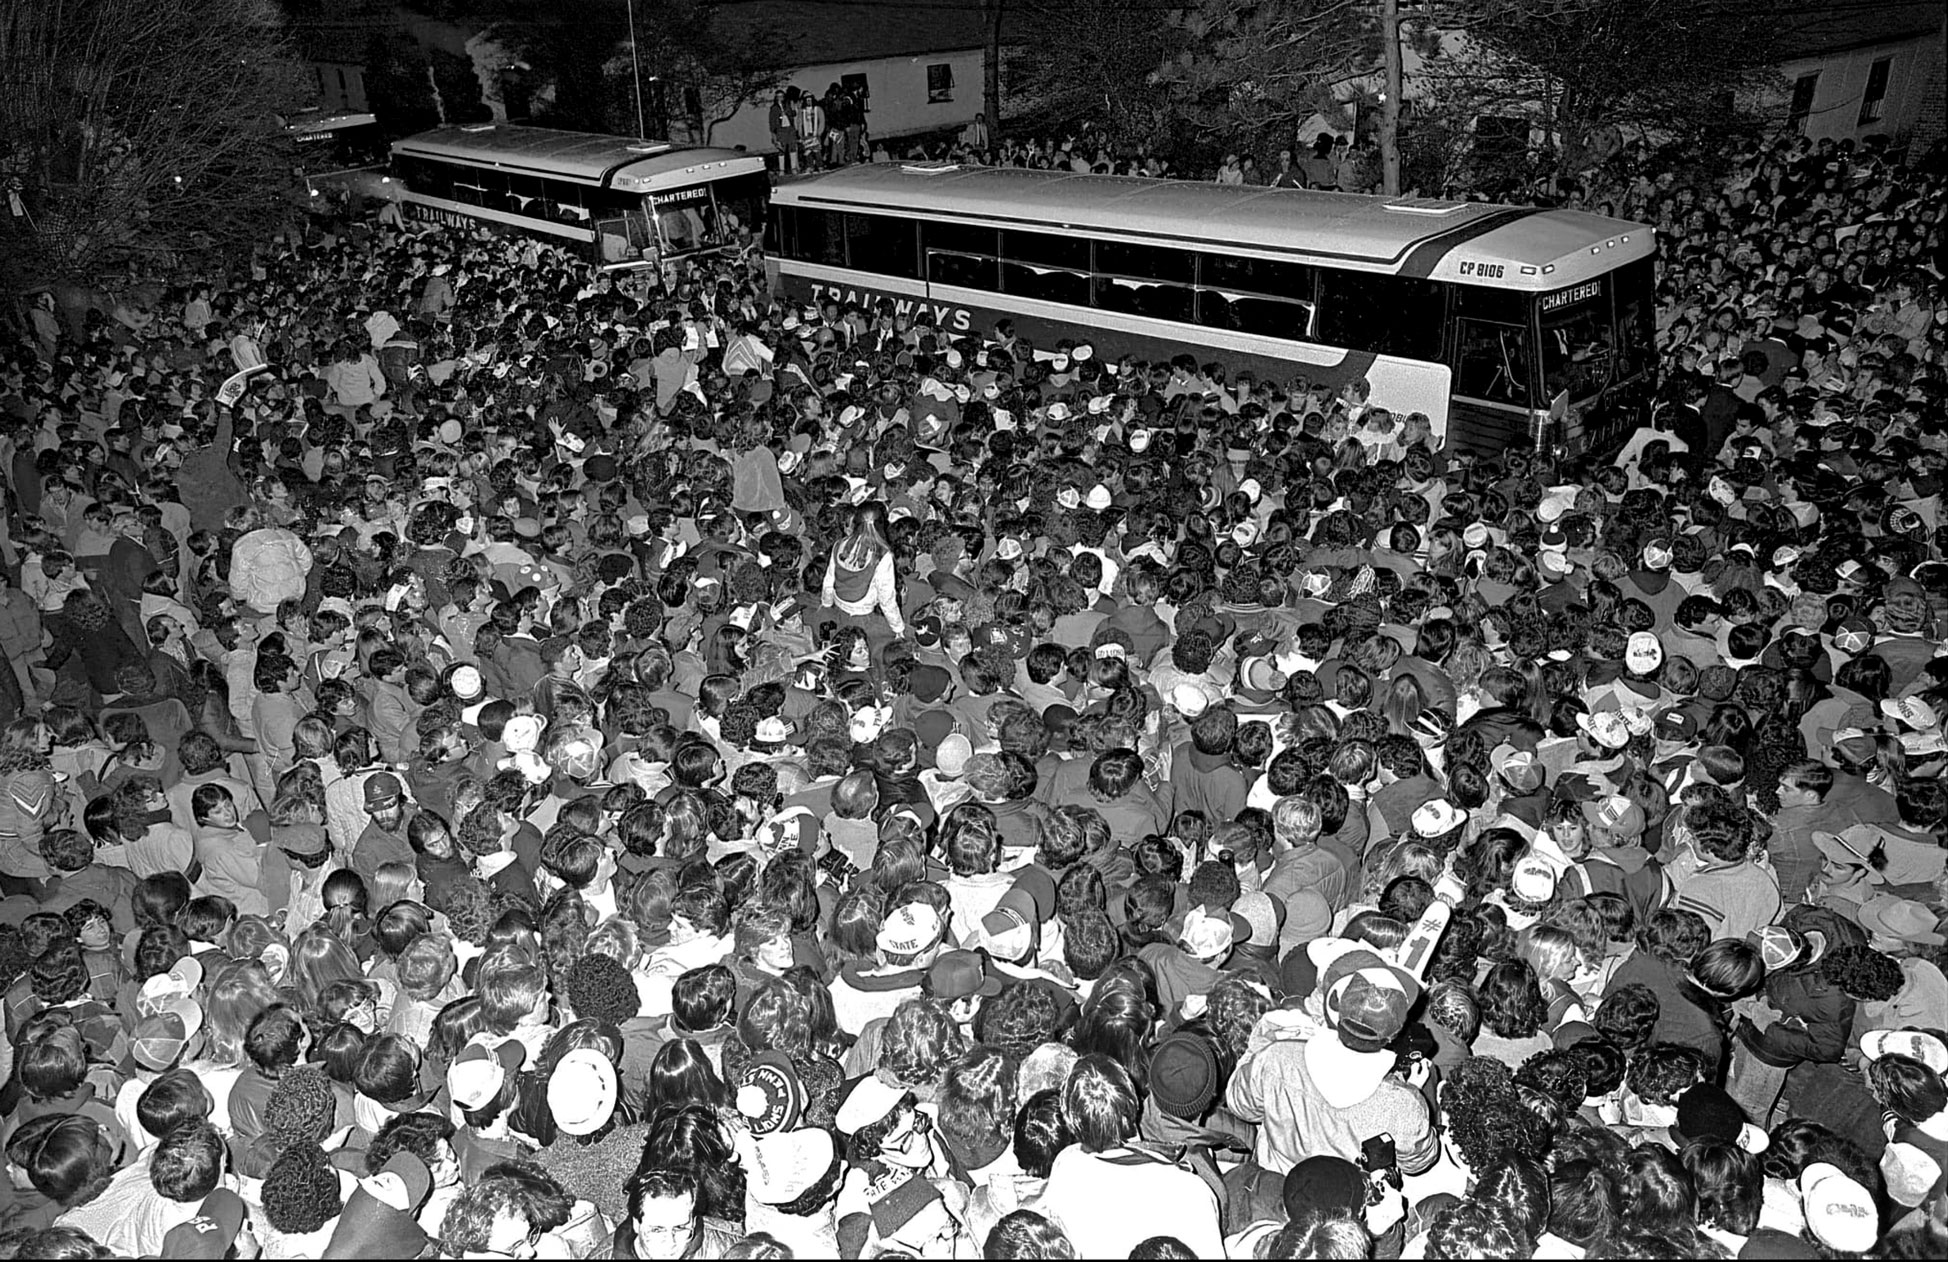 black and white photo of a large crowd of people greeting the arrival of a caravan of tour busses by Pat Little